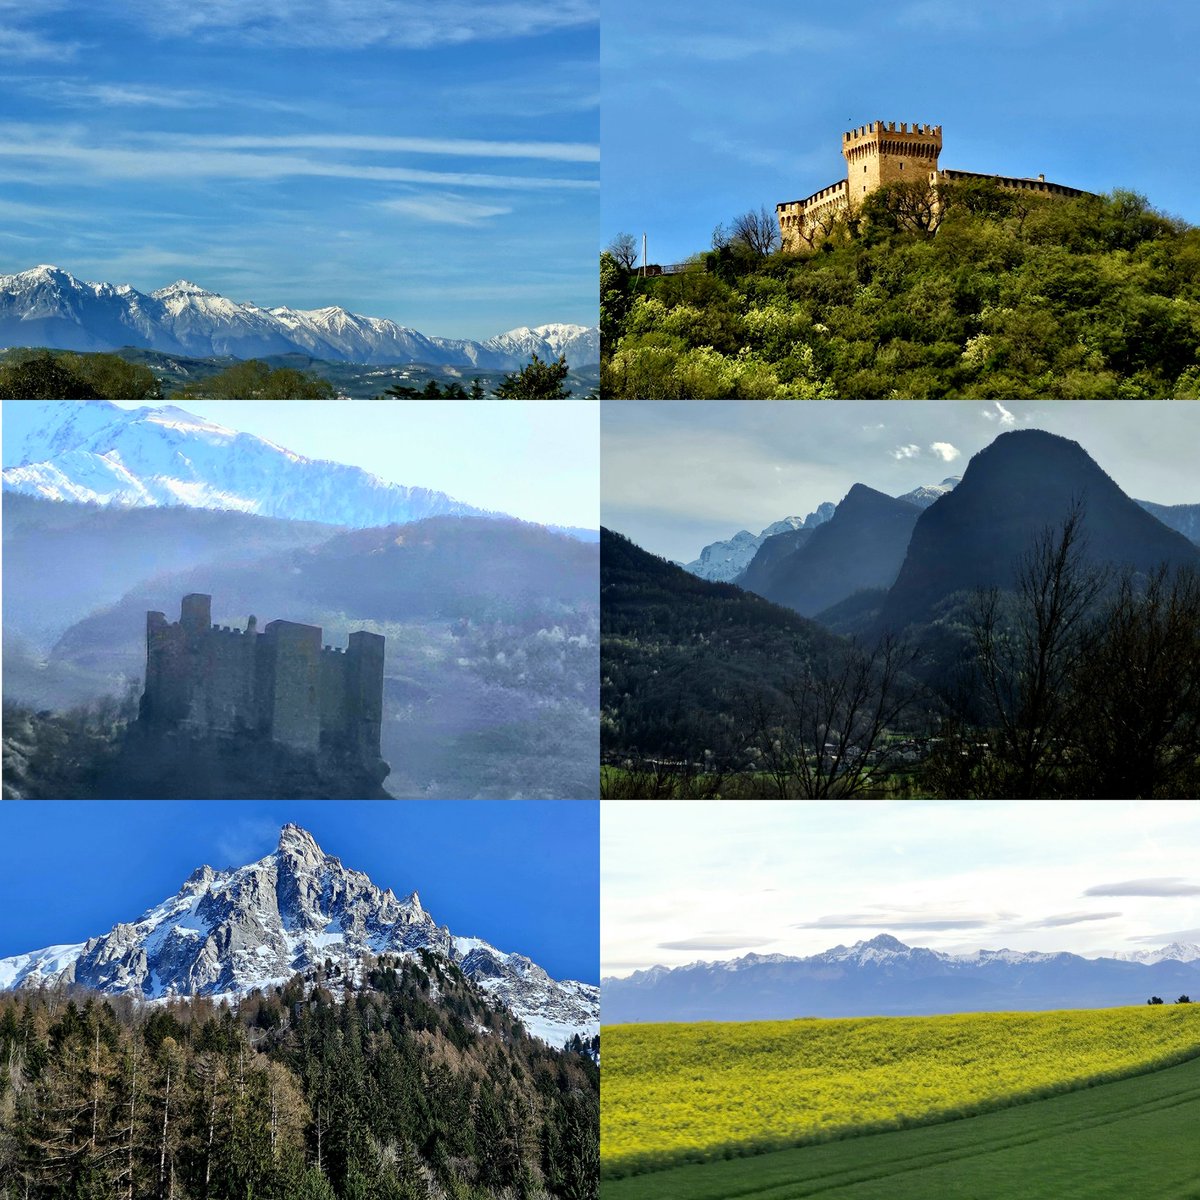 Since everyone wants to share photos of their recent vacations these days, here are mine. 😜
#Italy #Abruzzo #MontBlanc #Switzerland #Alps